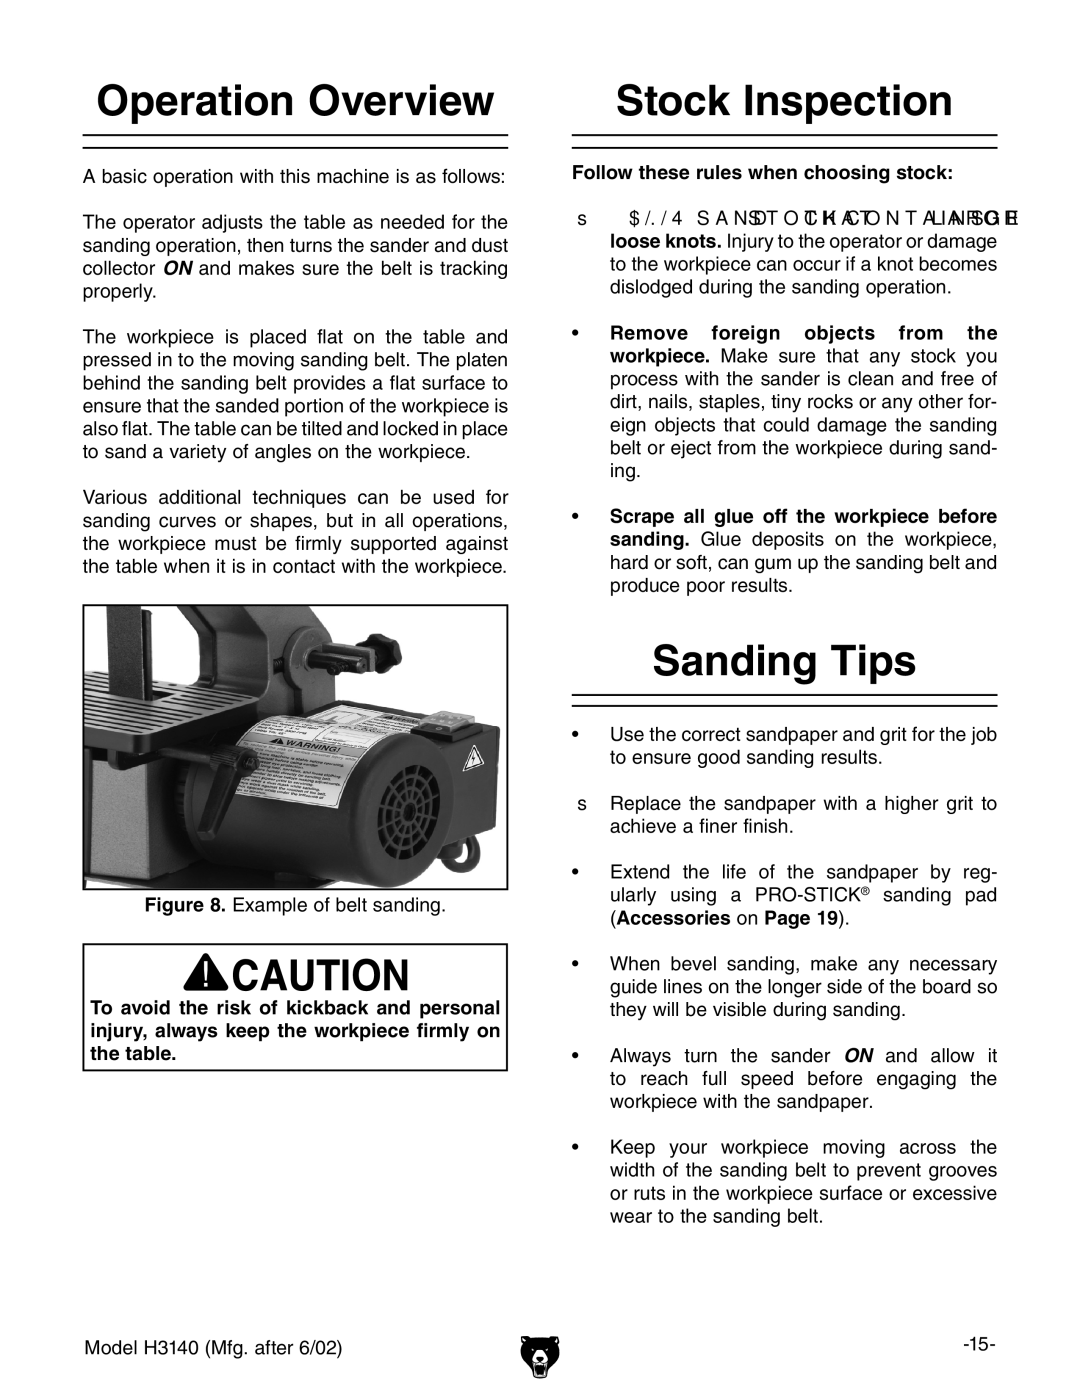 Grizzly H3140 owner manual Operation Overview, Stock Inspection, Sanding Tips, Follow these rules when choosing stock 